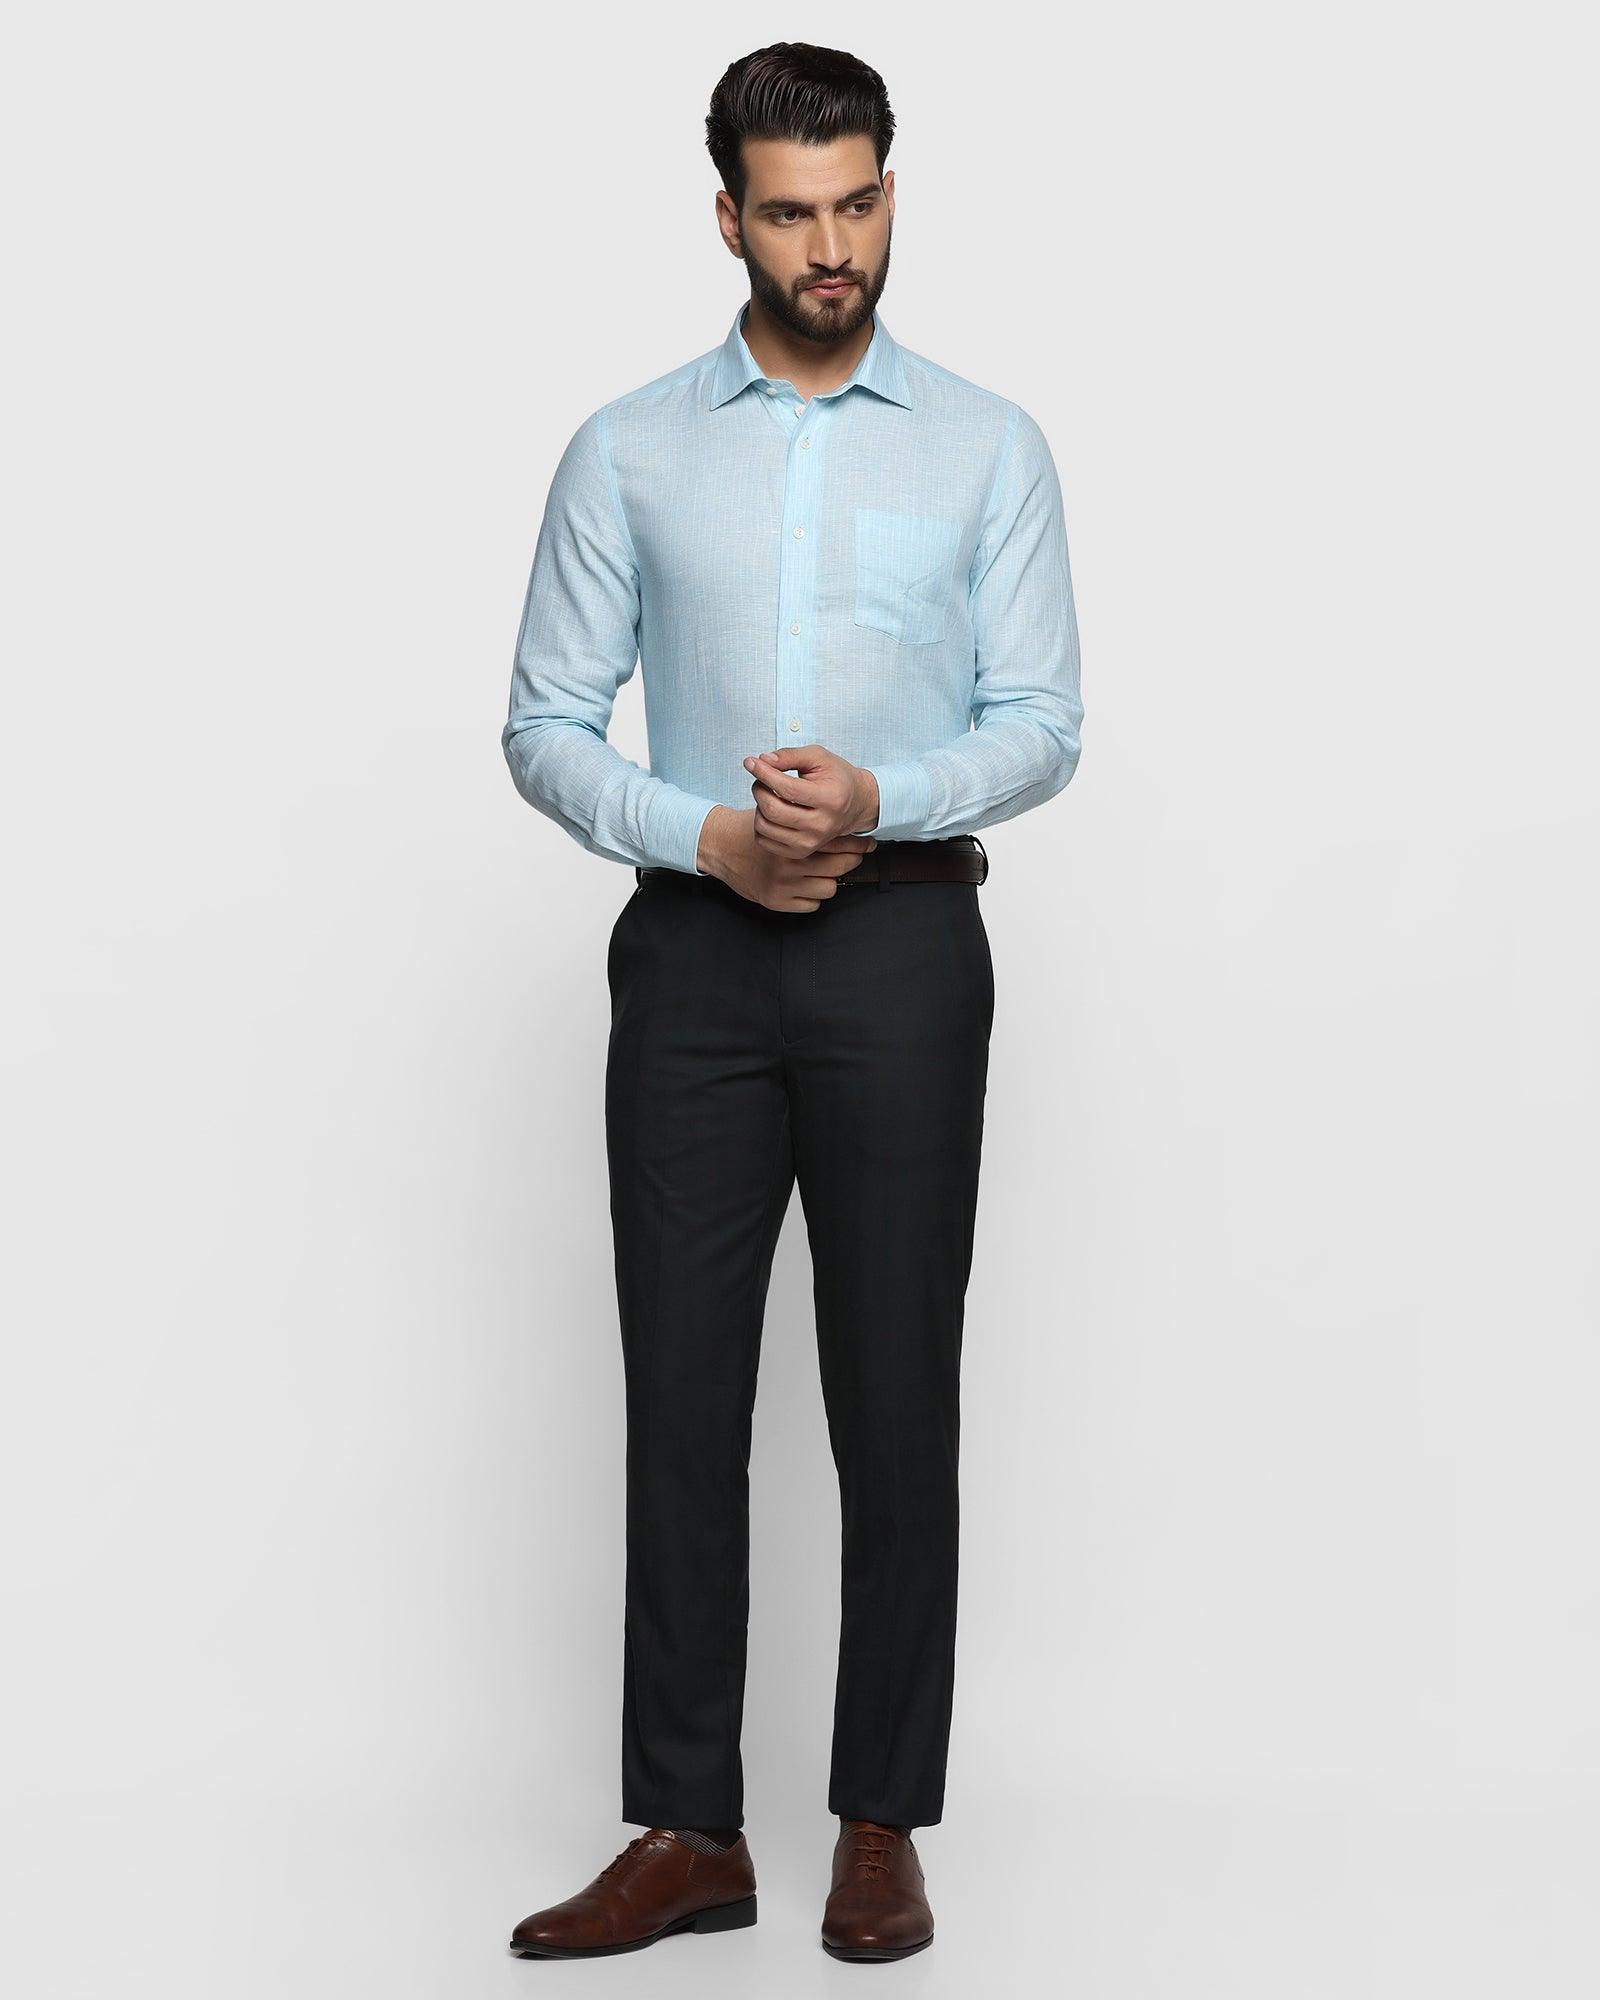 Men's Cotton Blend Pistagreen & Blue Checked Formal Trousers - Sojanya |  Business casual men, Trousers, Cotton blend